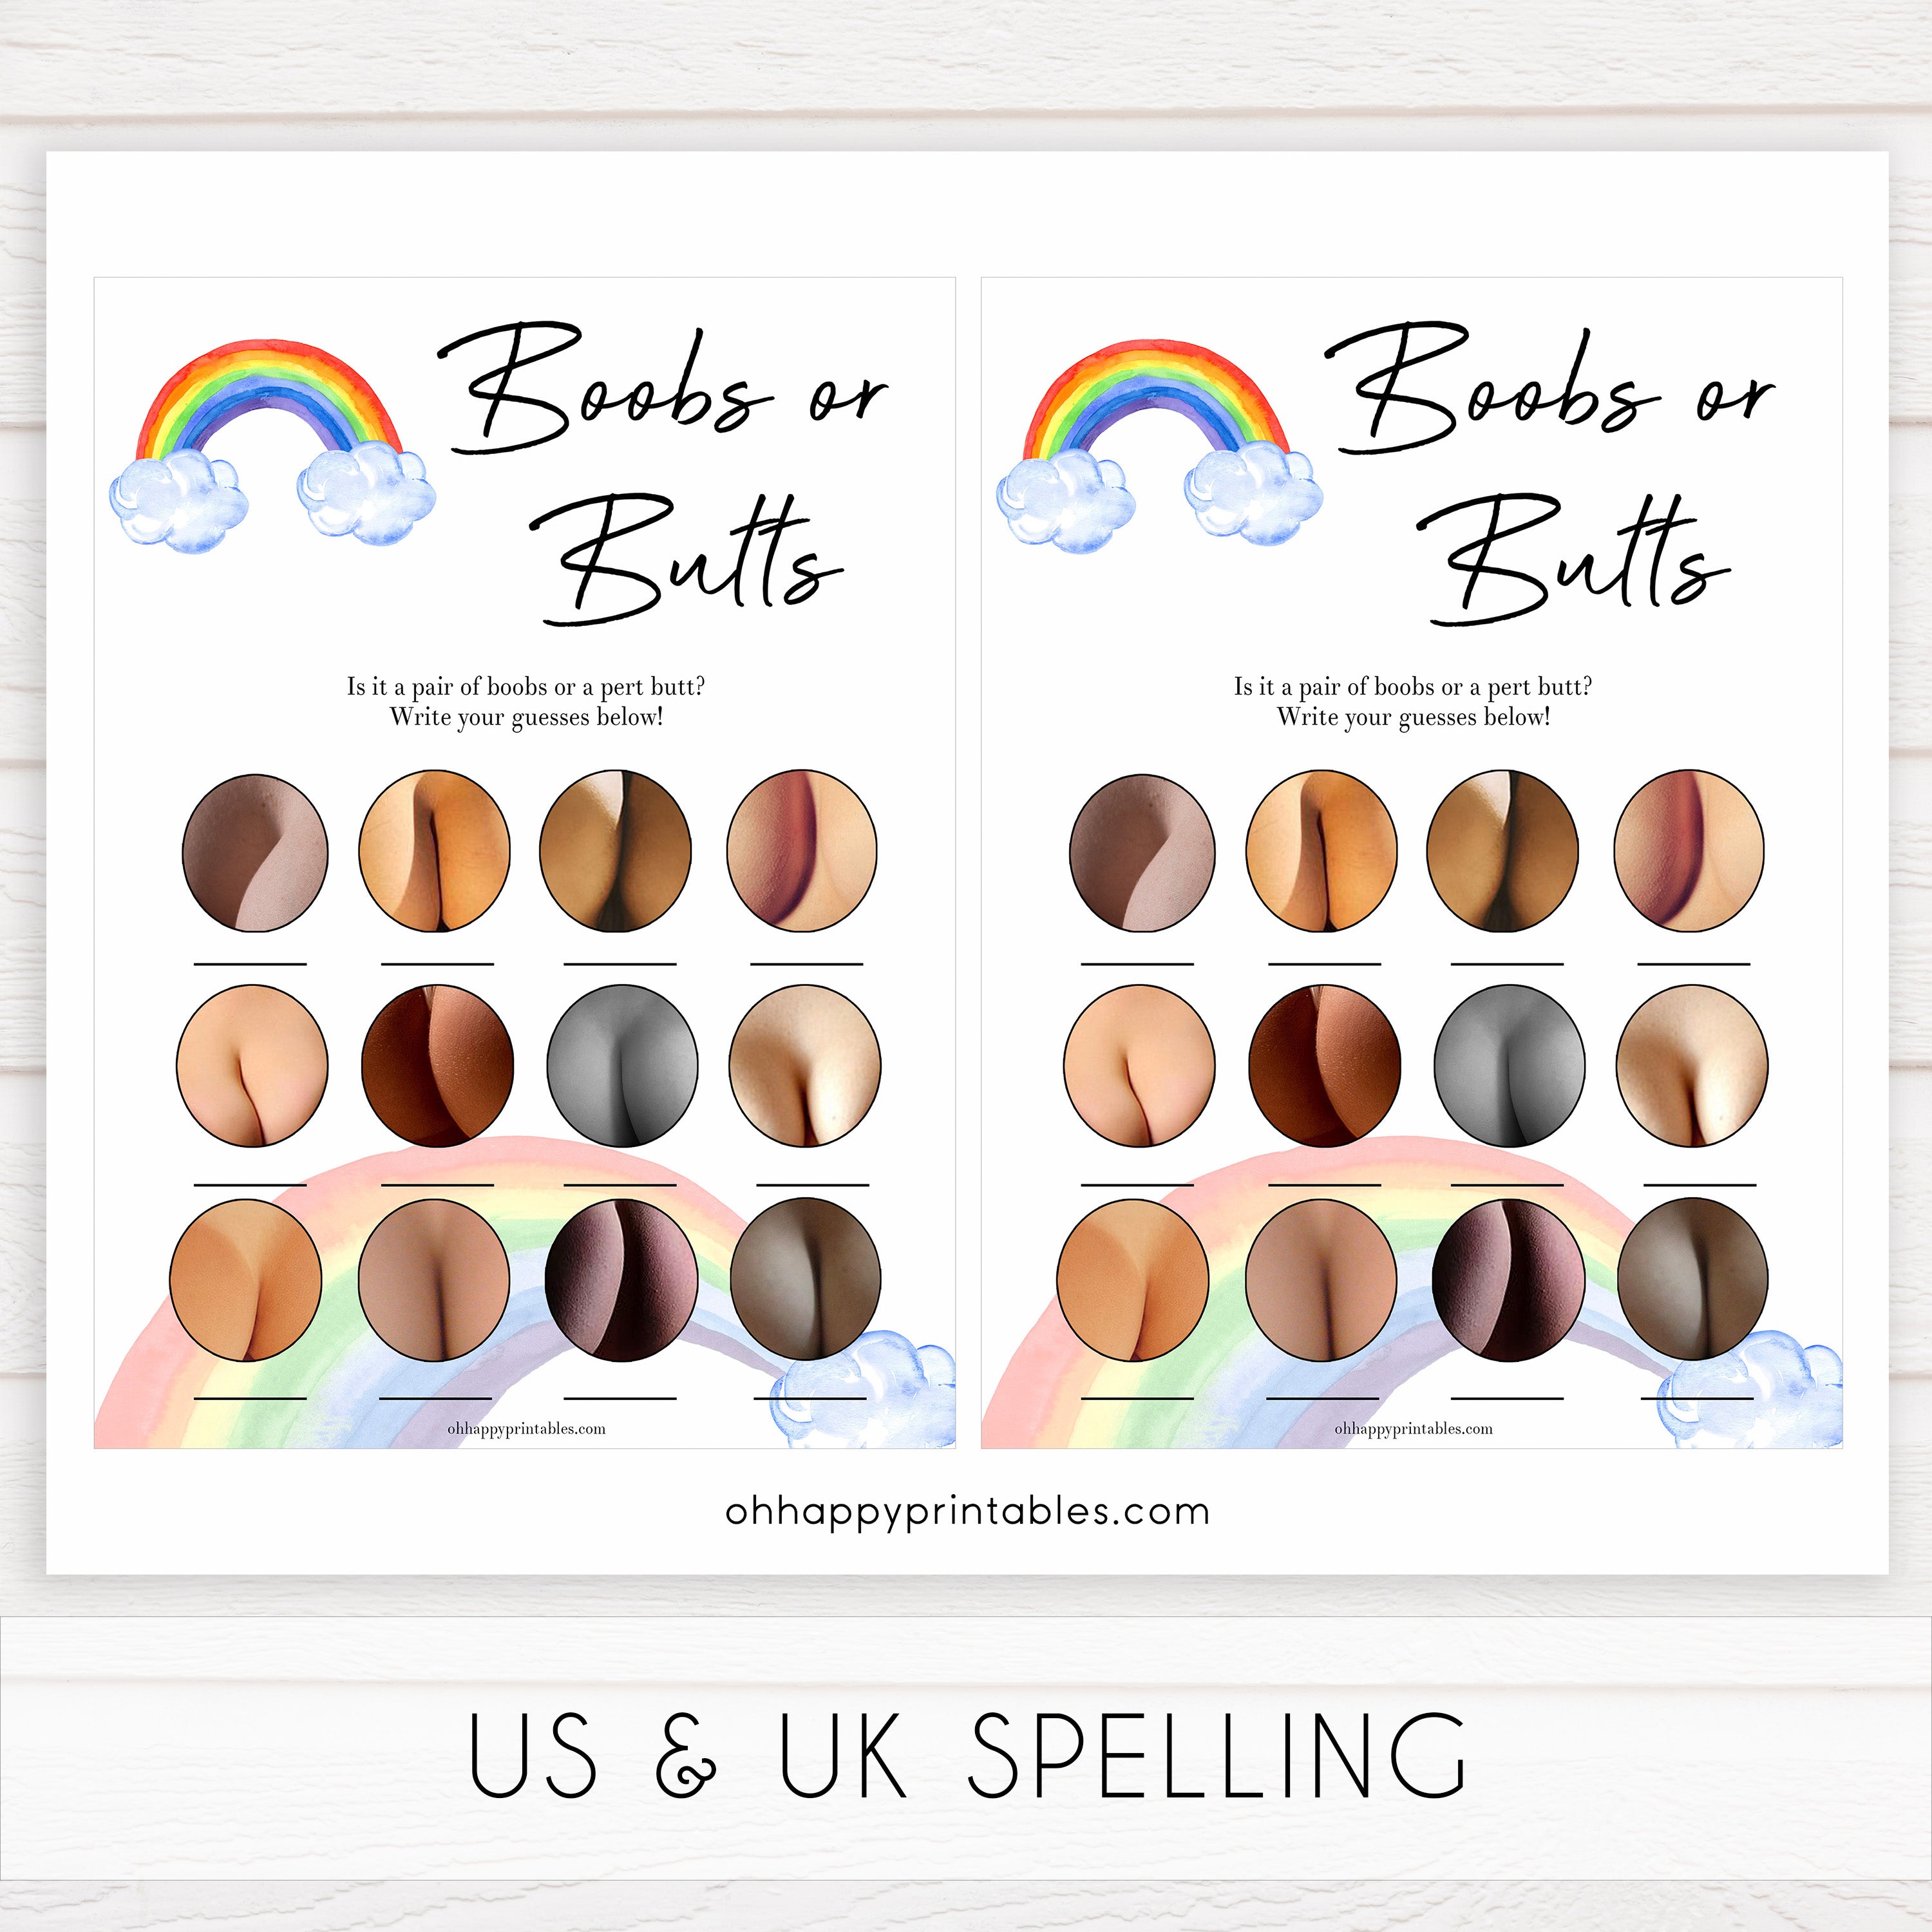 Rainbow baby games, rainbow boobs or butts, rainbow printable baby games, instant download games, rainbow baby shower, printable baby games, fun baby games, popular baby games, top 10 baby games